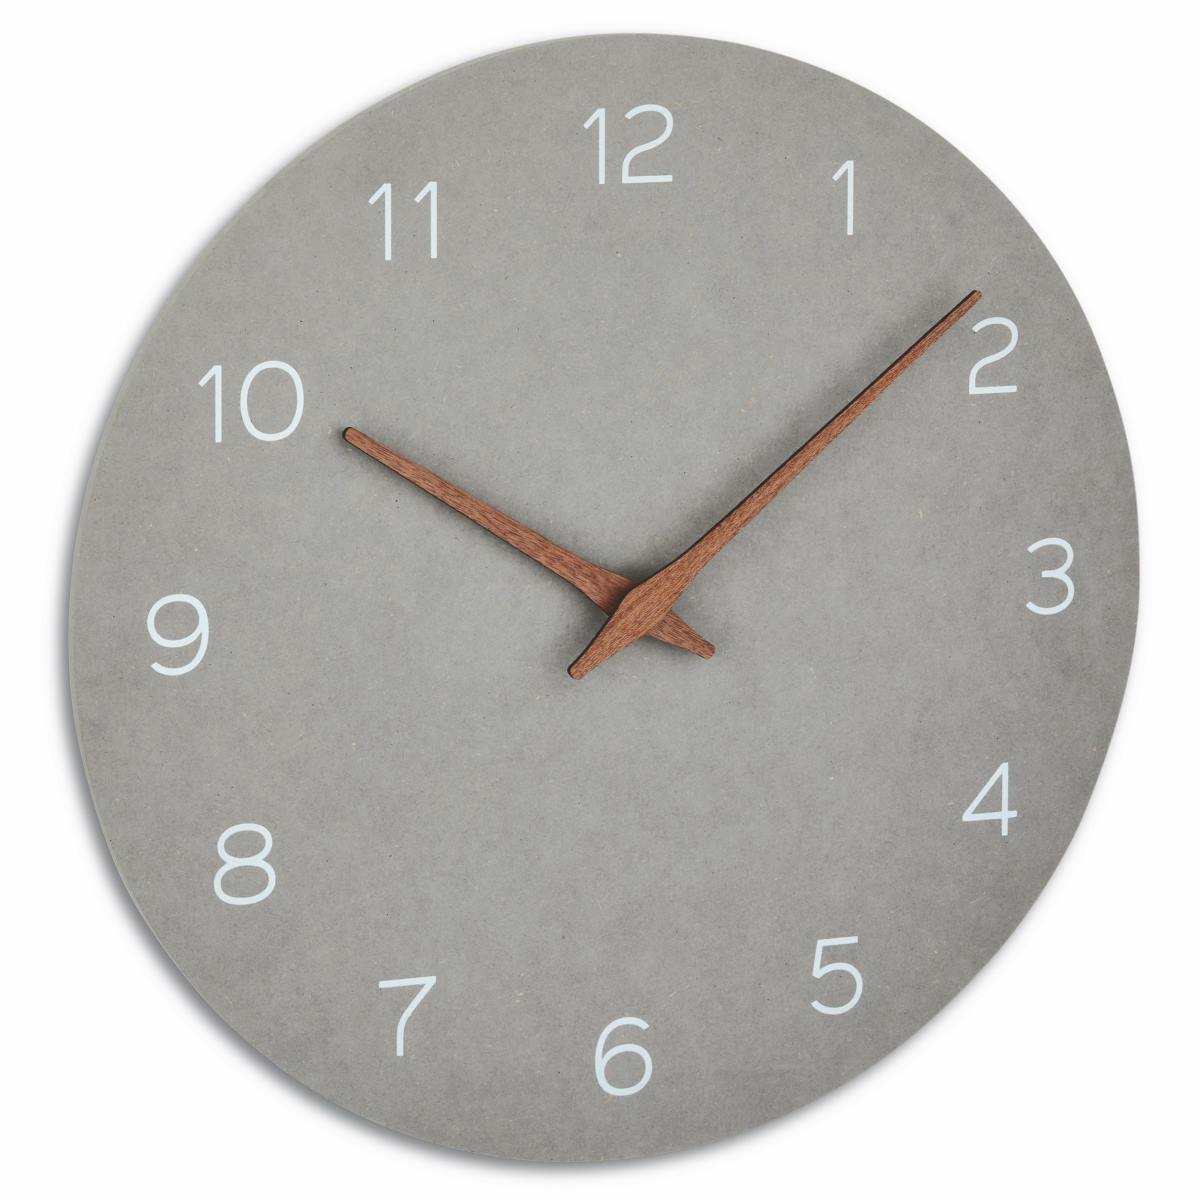 Featured image of post Minimalist Wall Clock Australia : Wooden wall clocks rustic wall clock modern wall clock kitchen wall clock minimalist wall clock large modern wall clock unique wall clock ◼1.5v aa battery (not included) ◻quartz silent german mechanism ◼the highest quality veneered mdf ◻natural wax oil and premium eco.